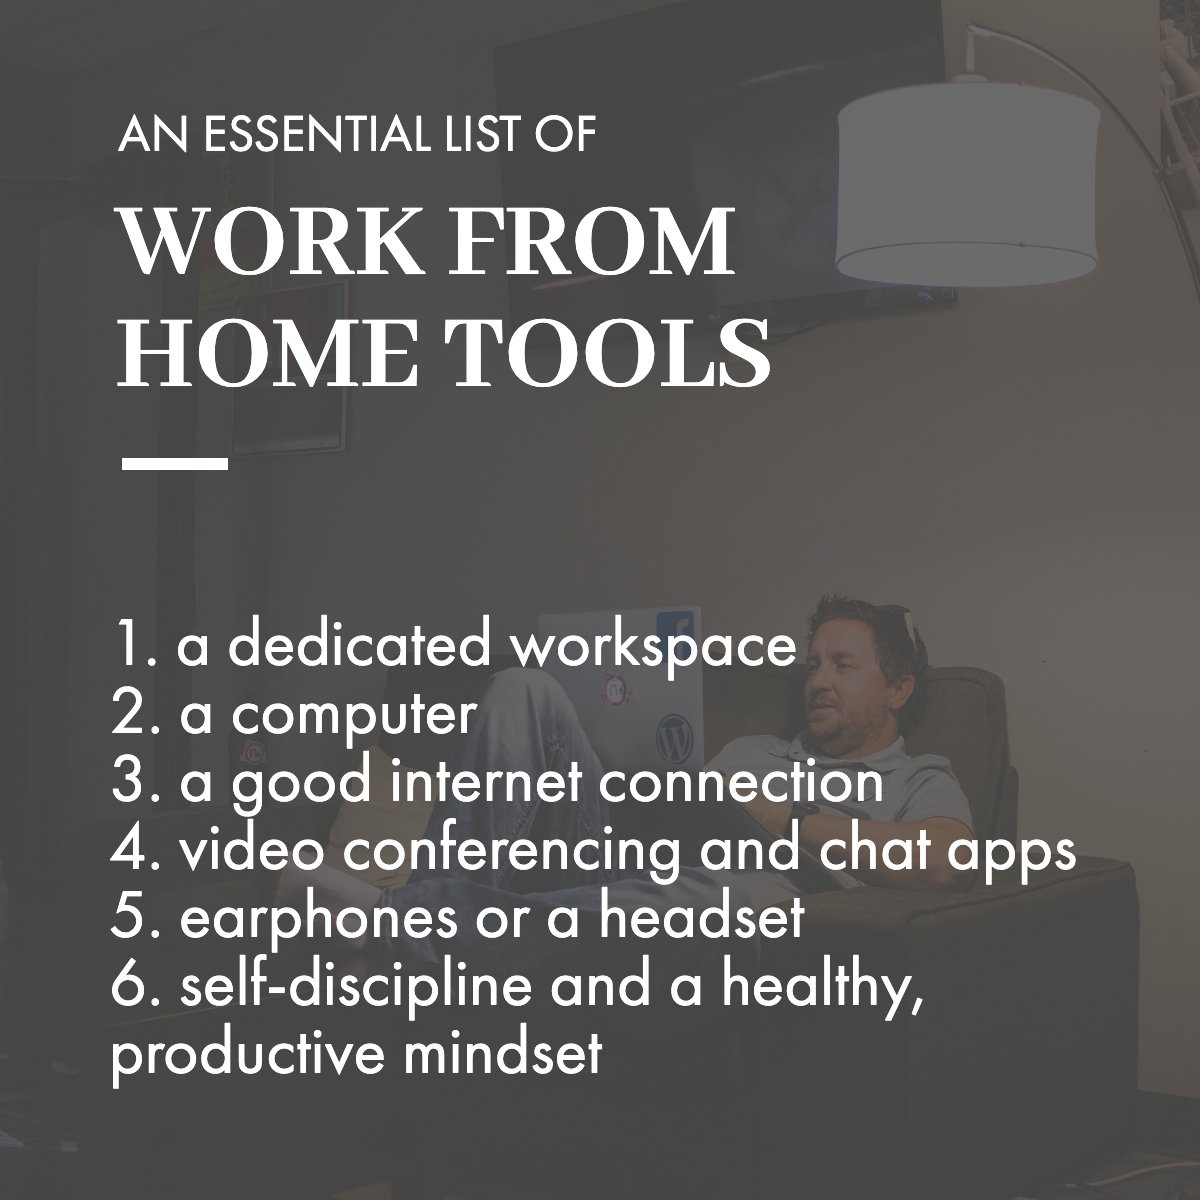 Check the list for essentials to work from home 💻

#workfromhome    #workathome    #homelifestyle    #homestudio    #remotelife
#ghentteam #expertadvice #realestateadvisors #buyers #sellers #investors